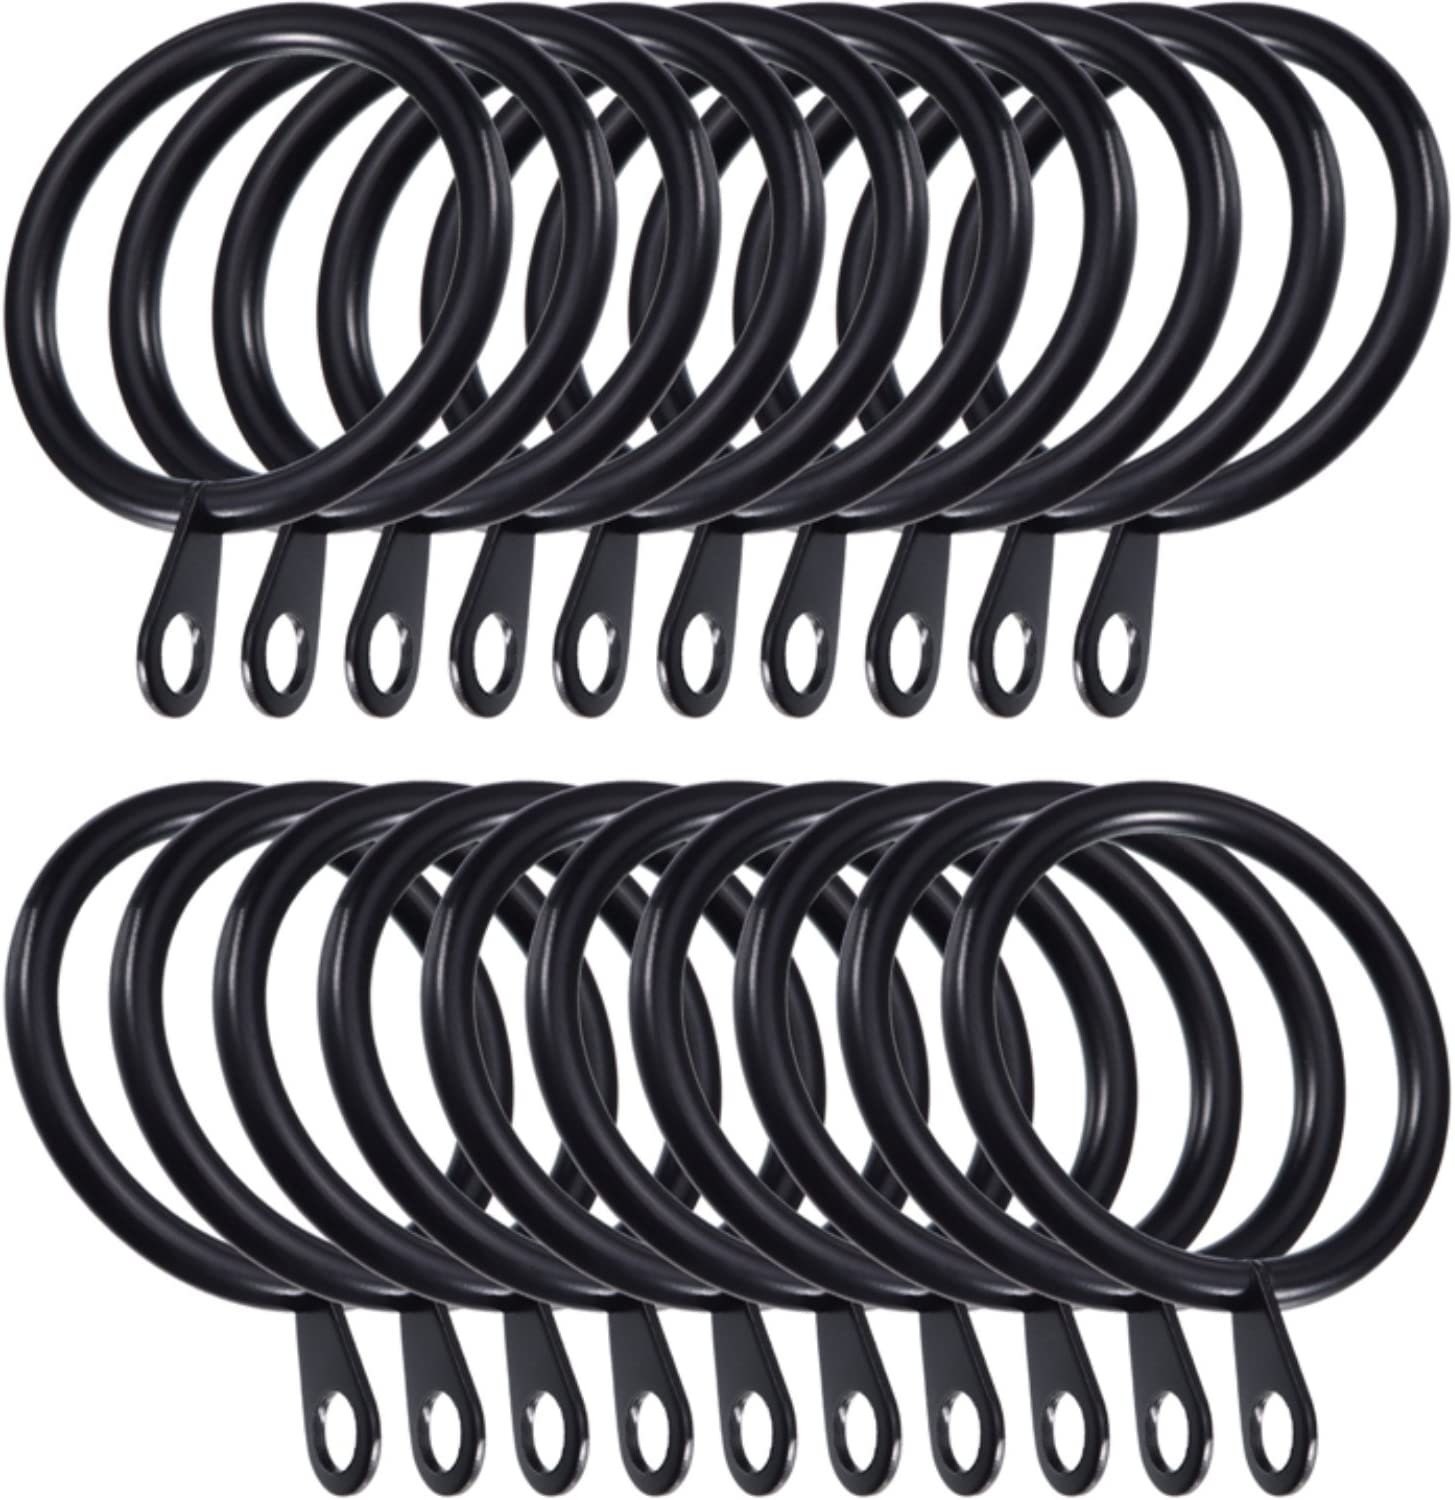 UK SELLER 12 X 30mm Strong Metal Curtain Rings With Eyes without clips Black 